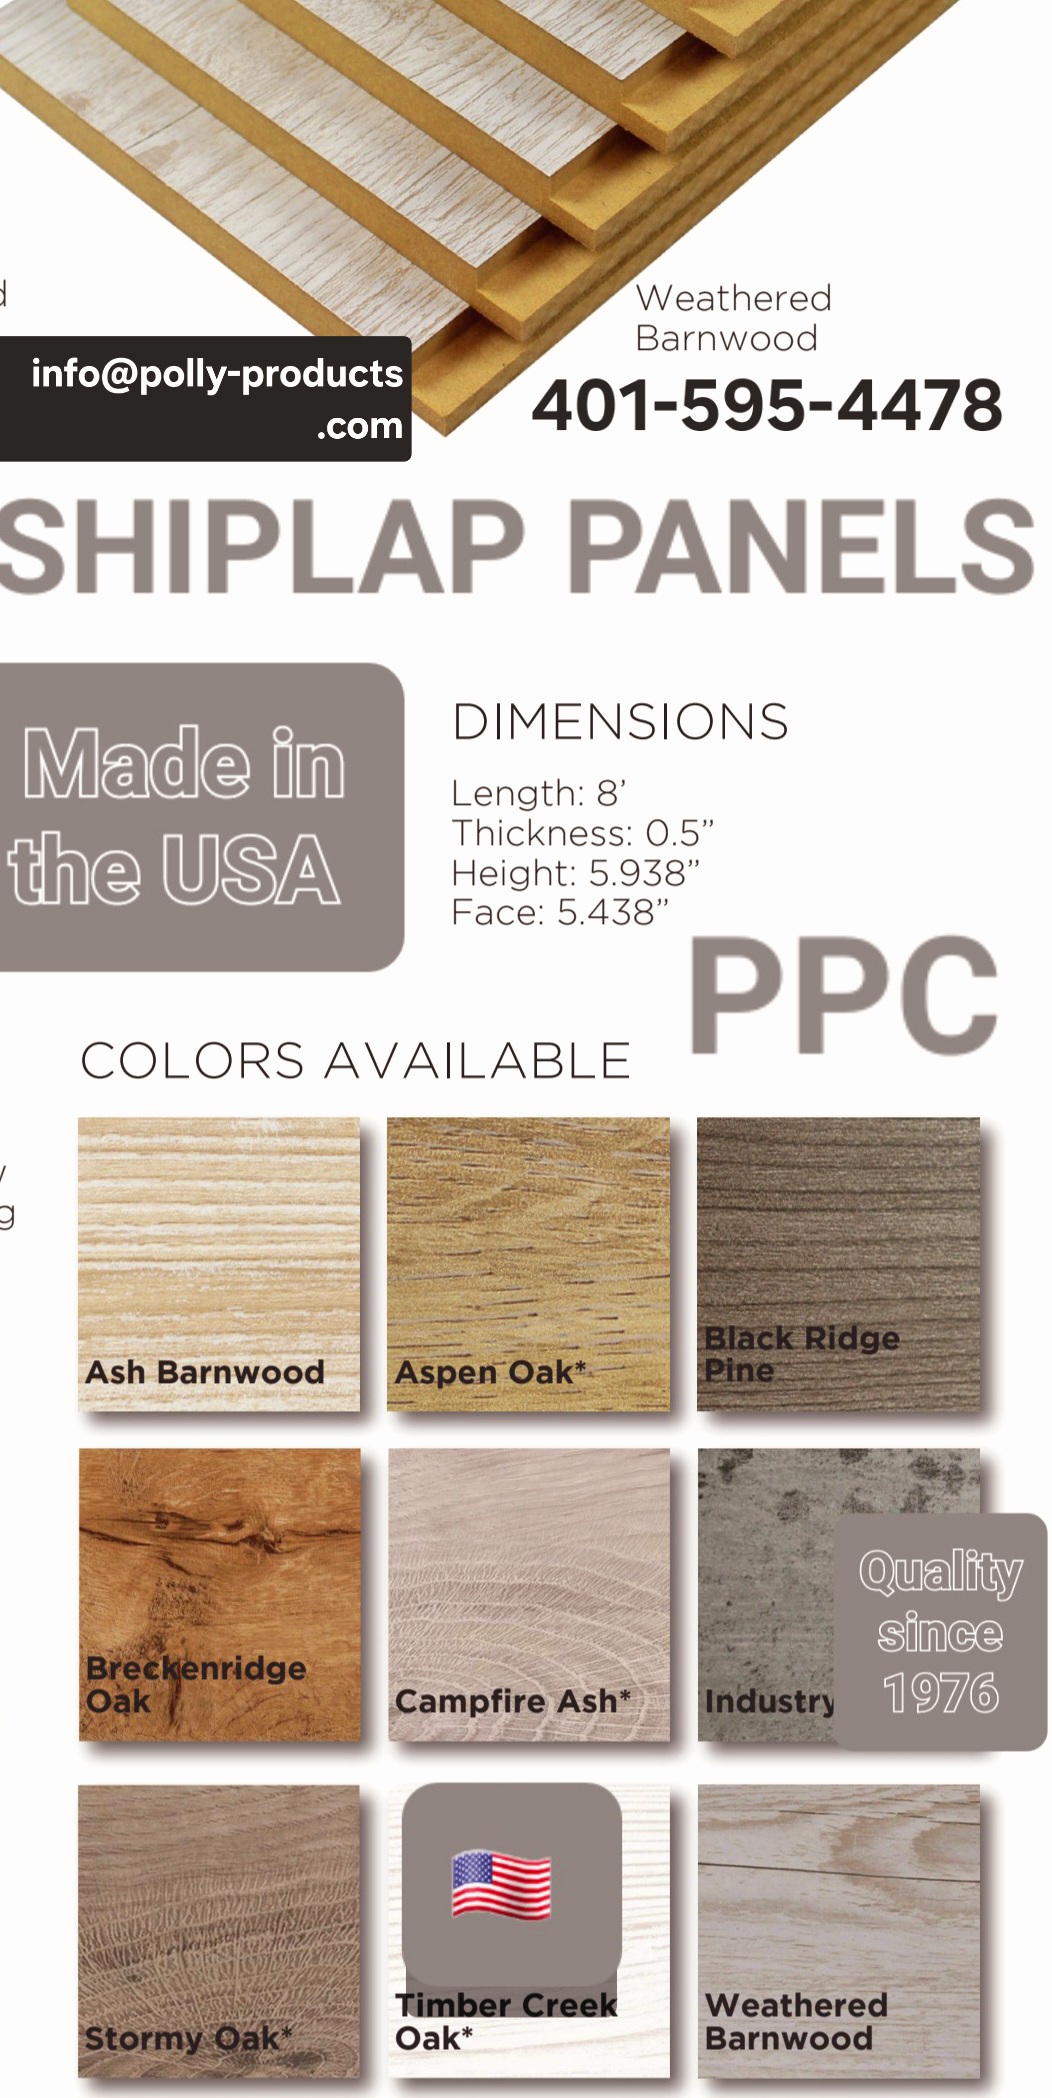 PPC SHIPLAP PANELS Made in the USA QUALITY 🇺🇸 SINCE 1976